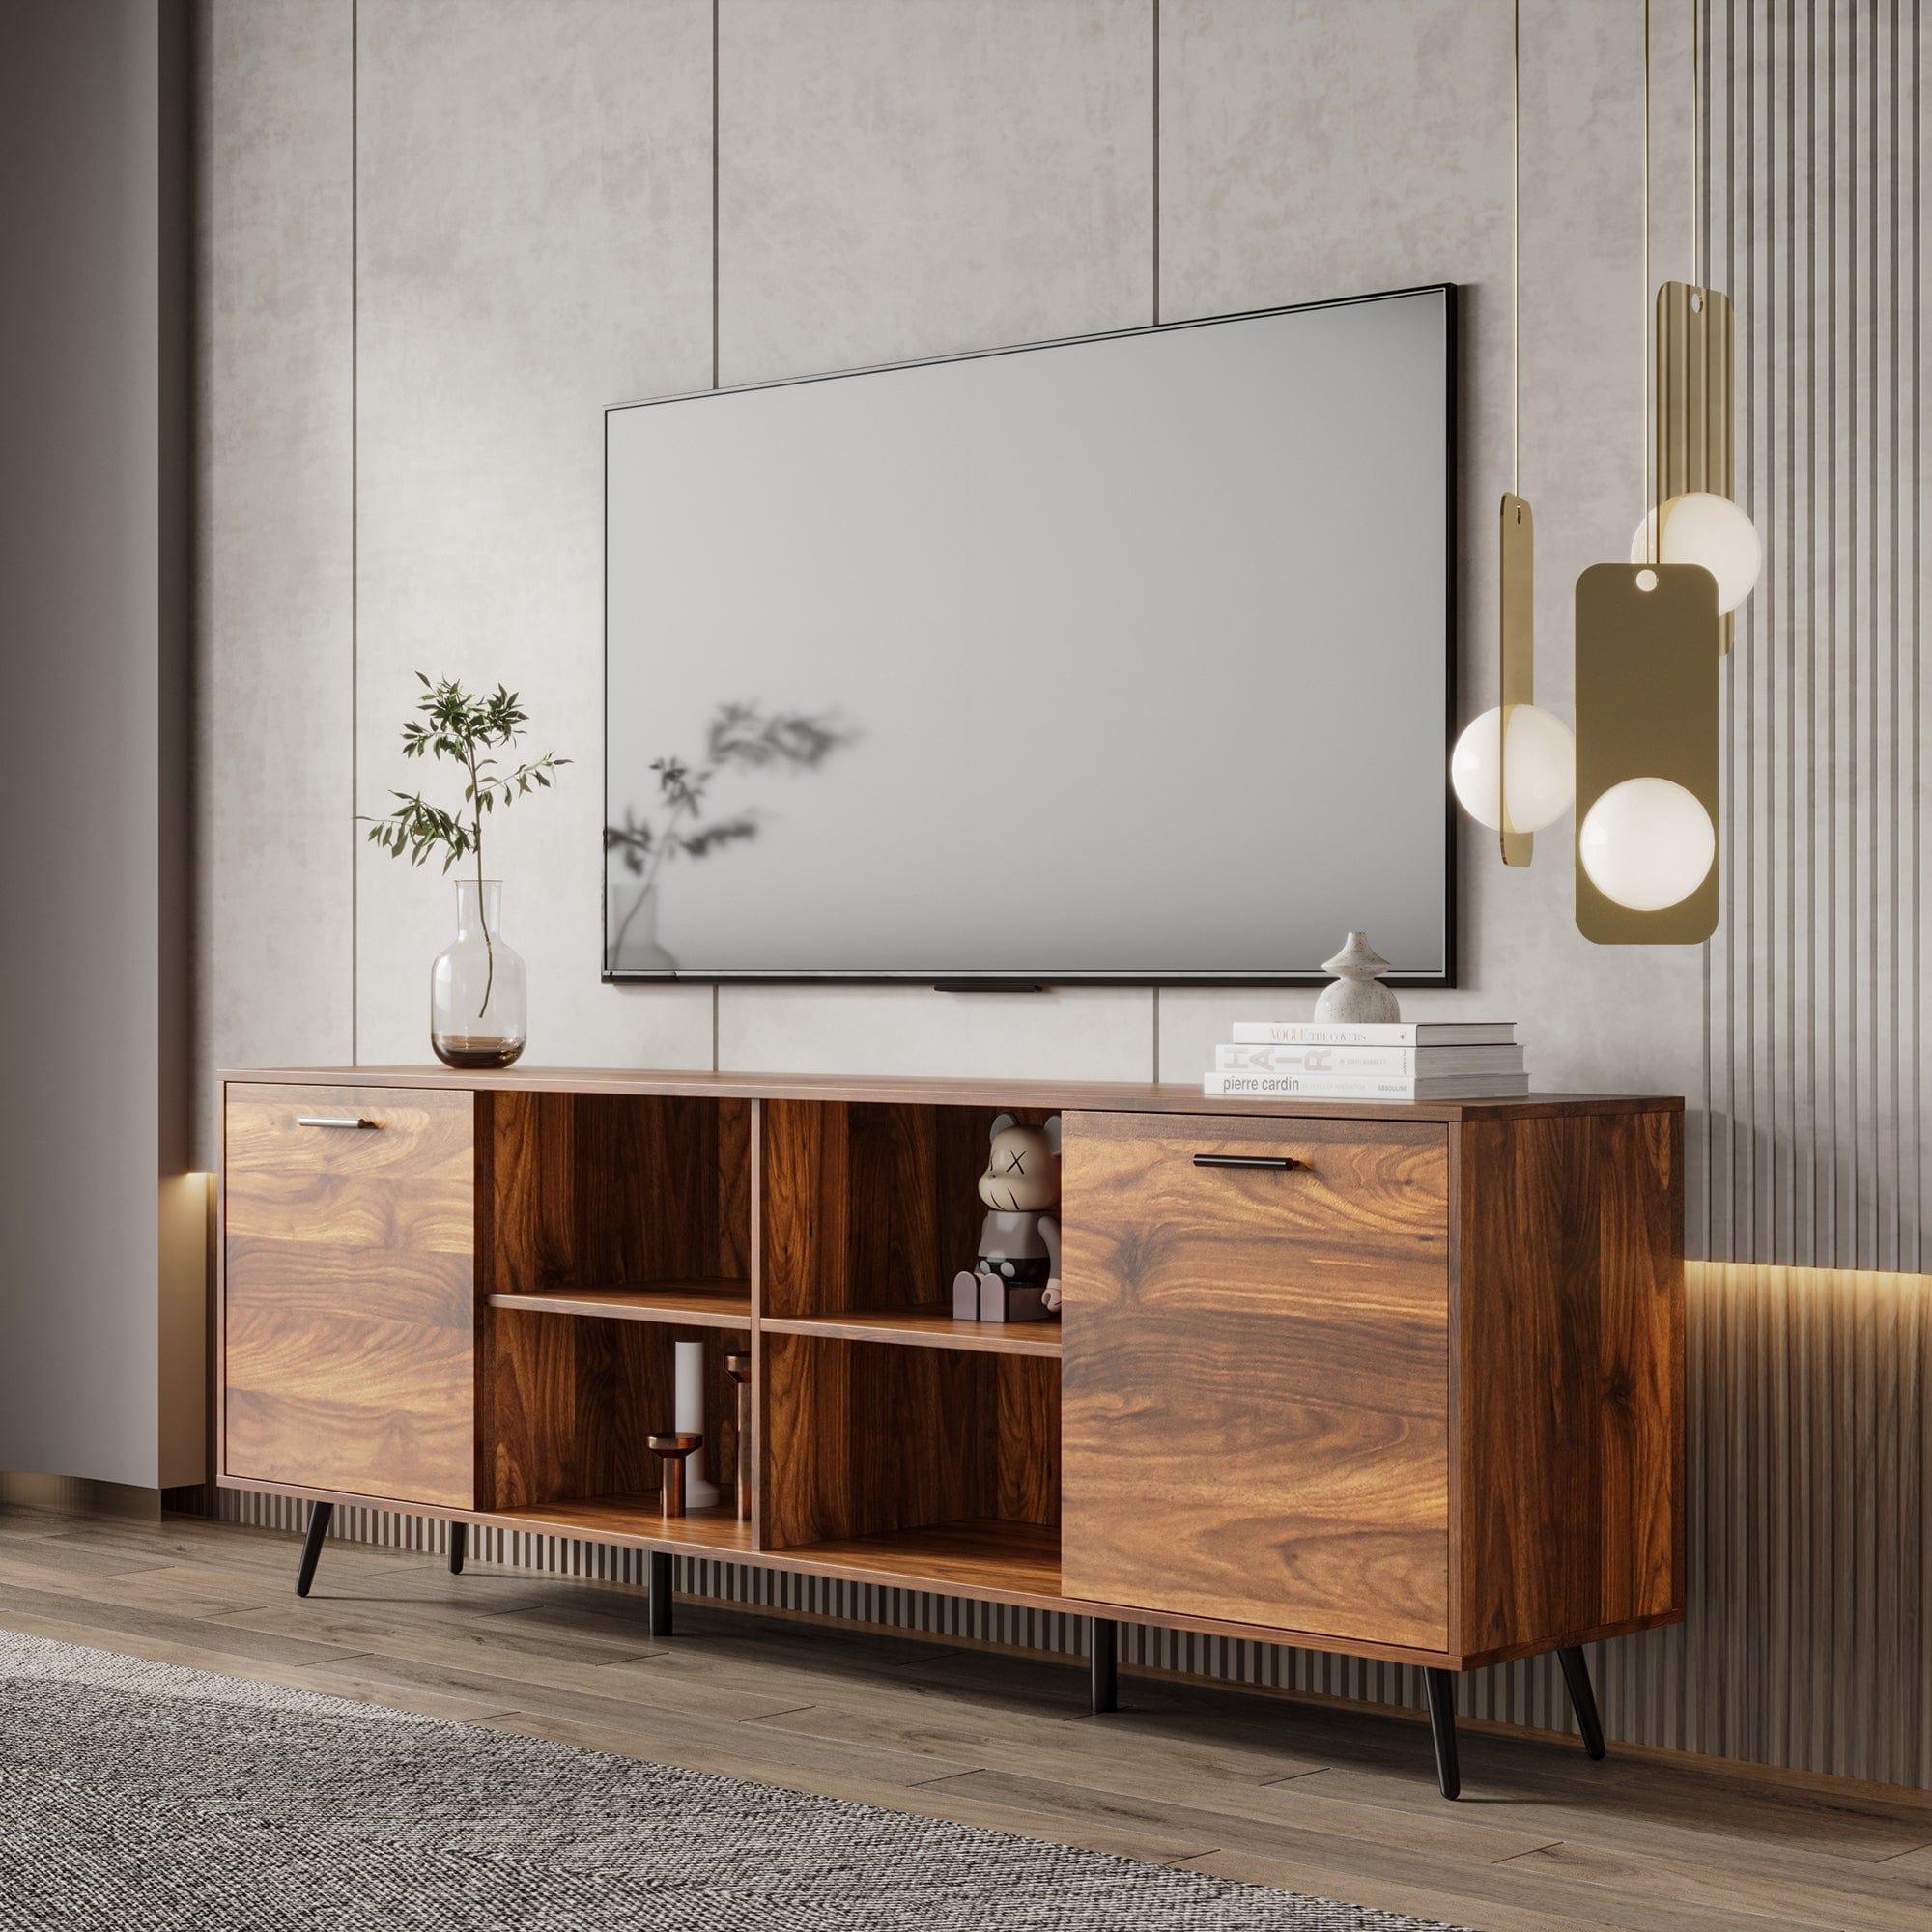 Shop TV Stand Mid-Century Wood Modern Entertainment Center Adjustable Storage Cabinet TV Console for Living Room Mademoiselle Home Decor